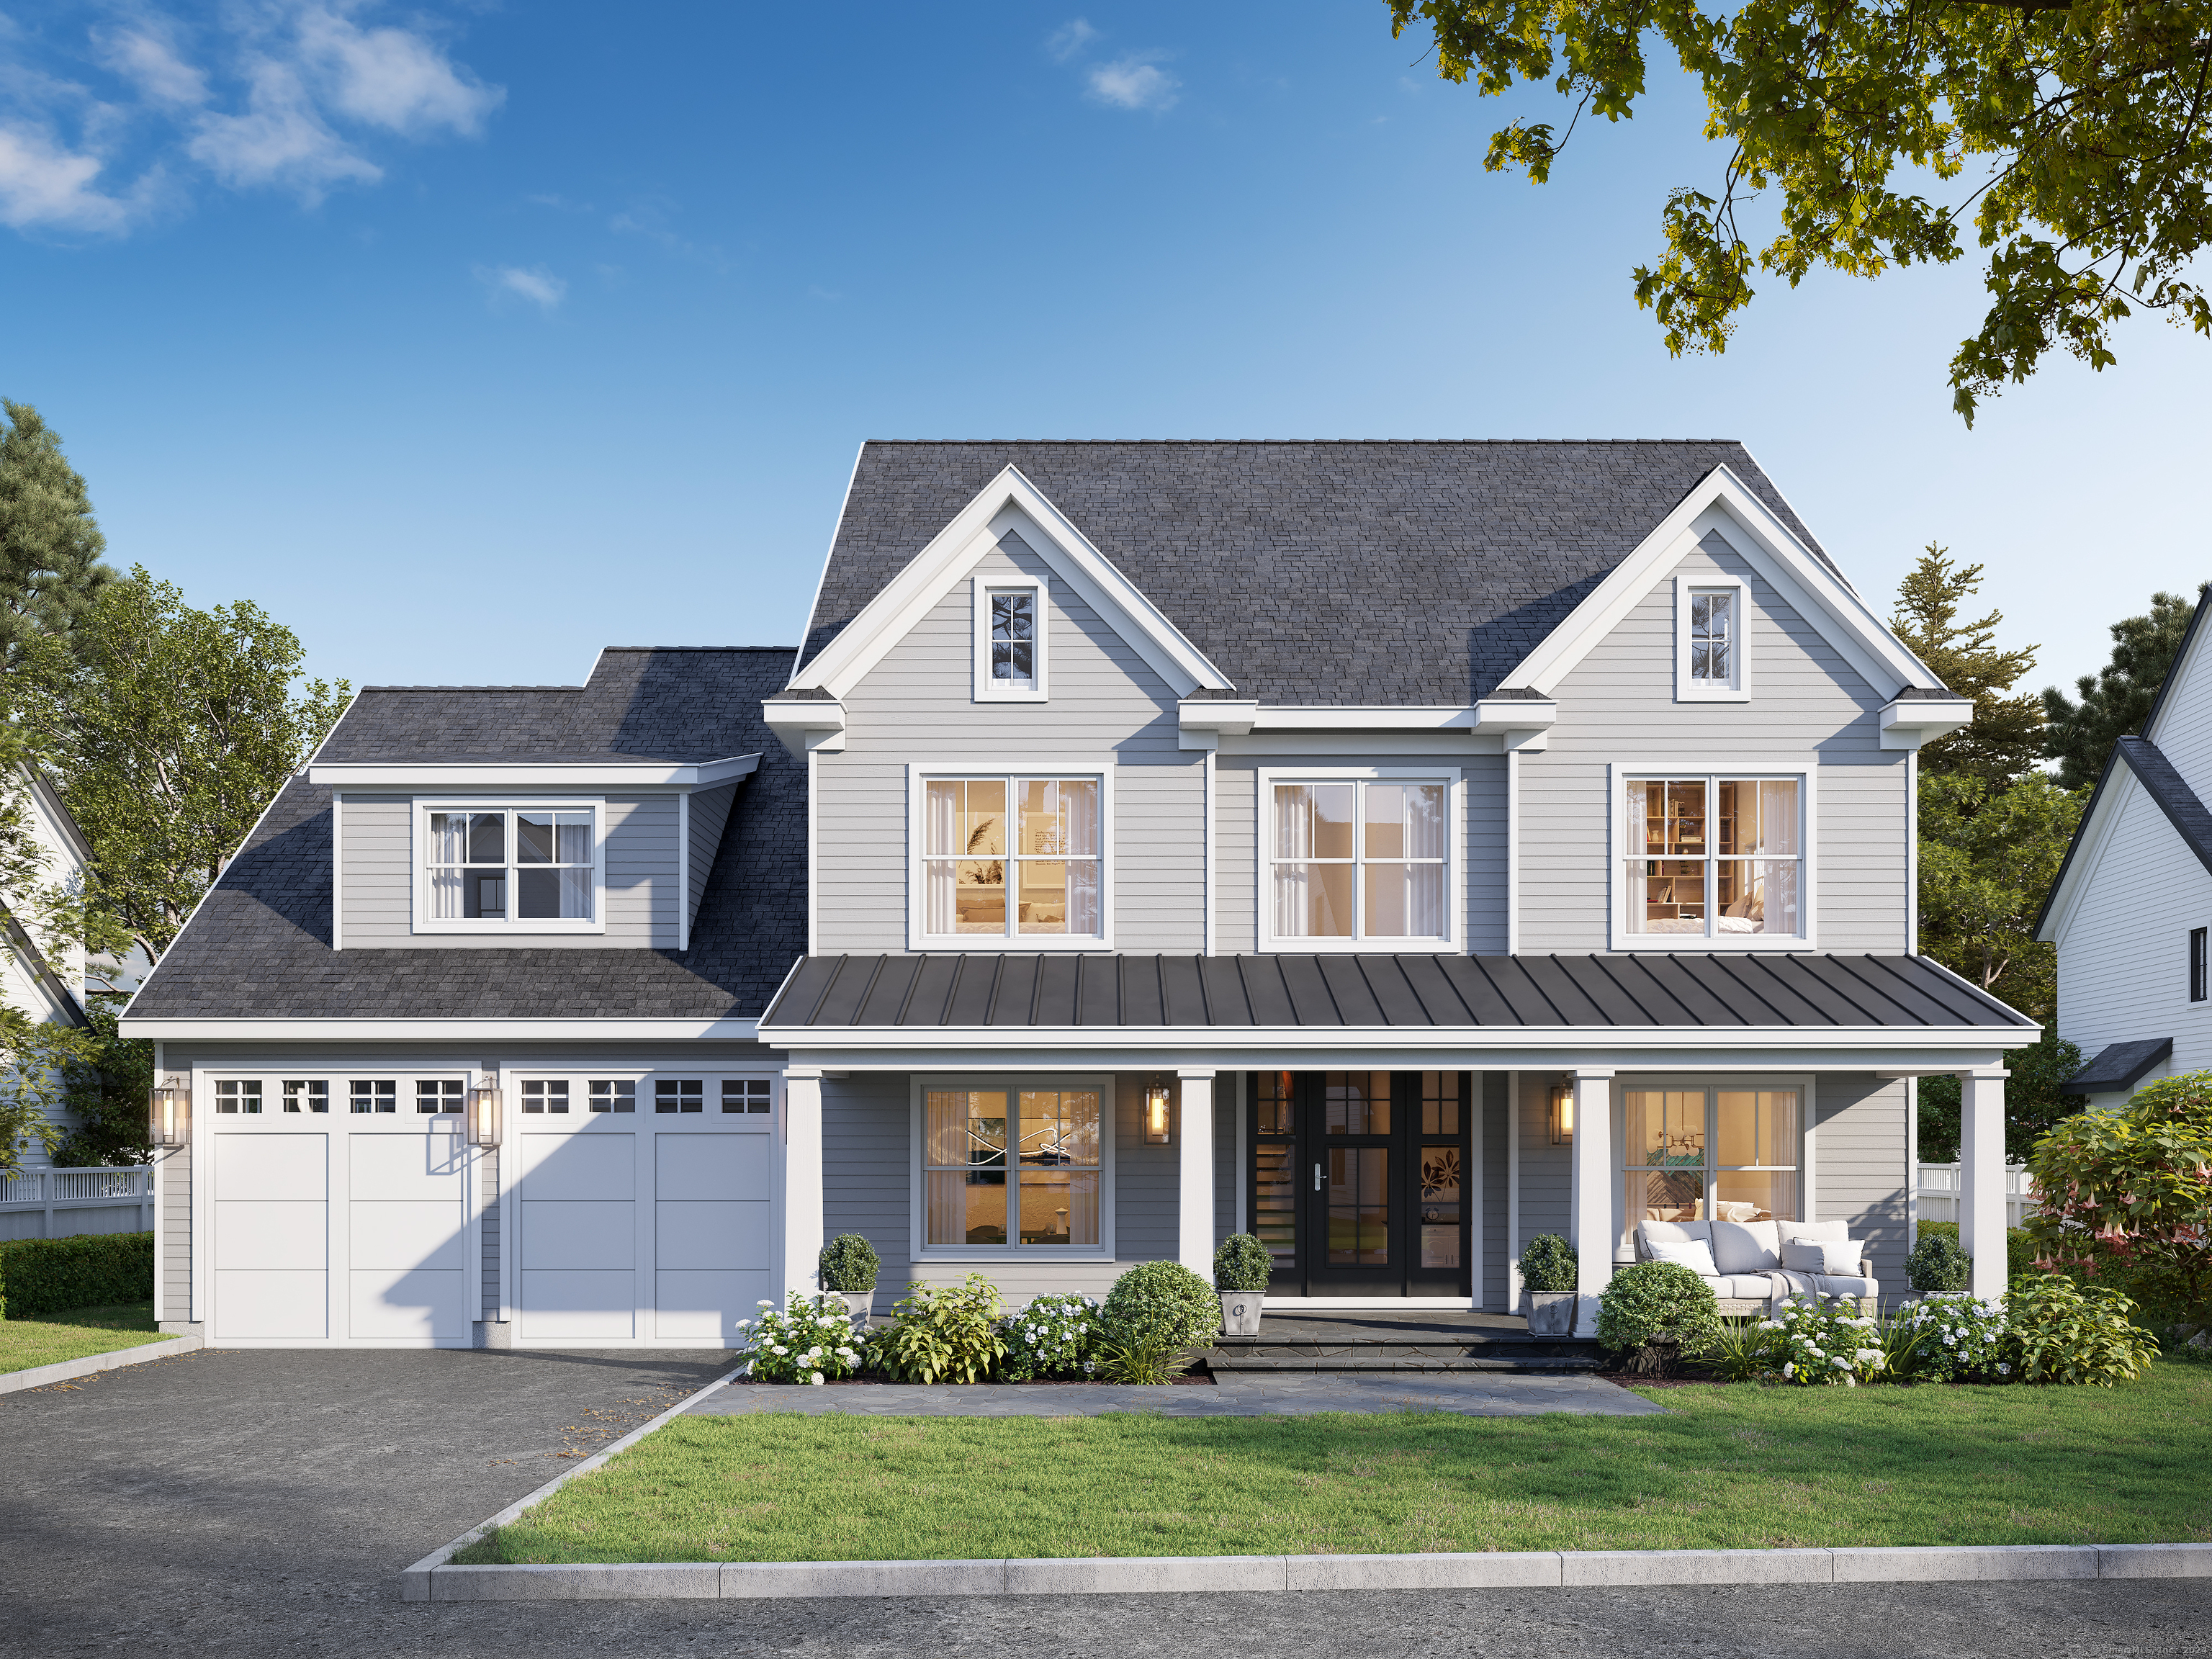 2 The Reserve At Sterling Ridge, Stamford, Connecticut - 4 Bedrooms  
4 Bathrooms  
8 Rooms - 